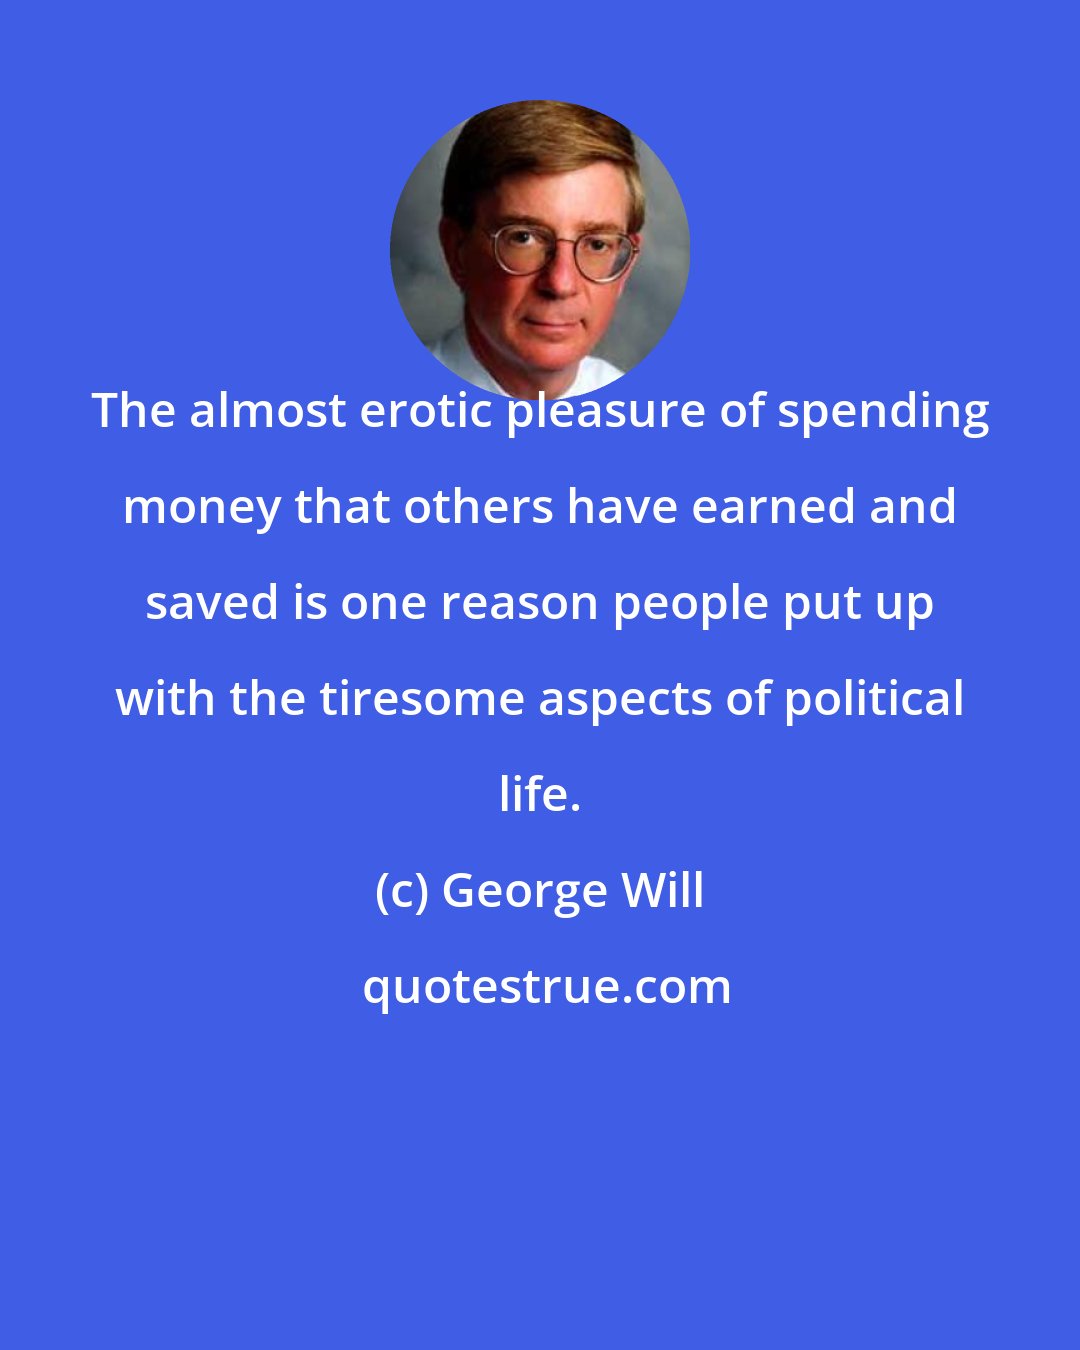 George Will: The almost erotic pleasure of spending money that others have earned and saved is one reason people put up with the tiresome aspects of political life.